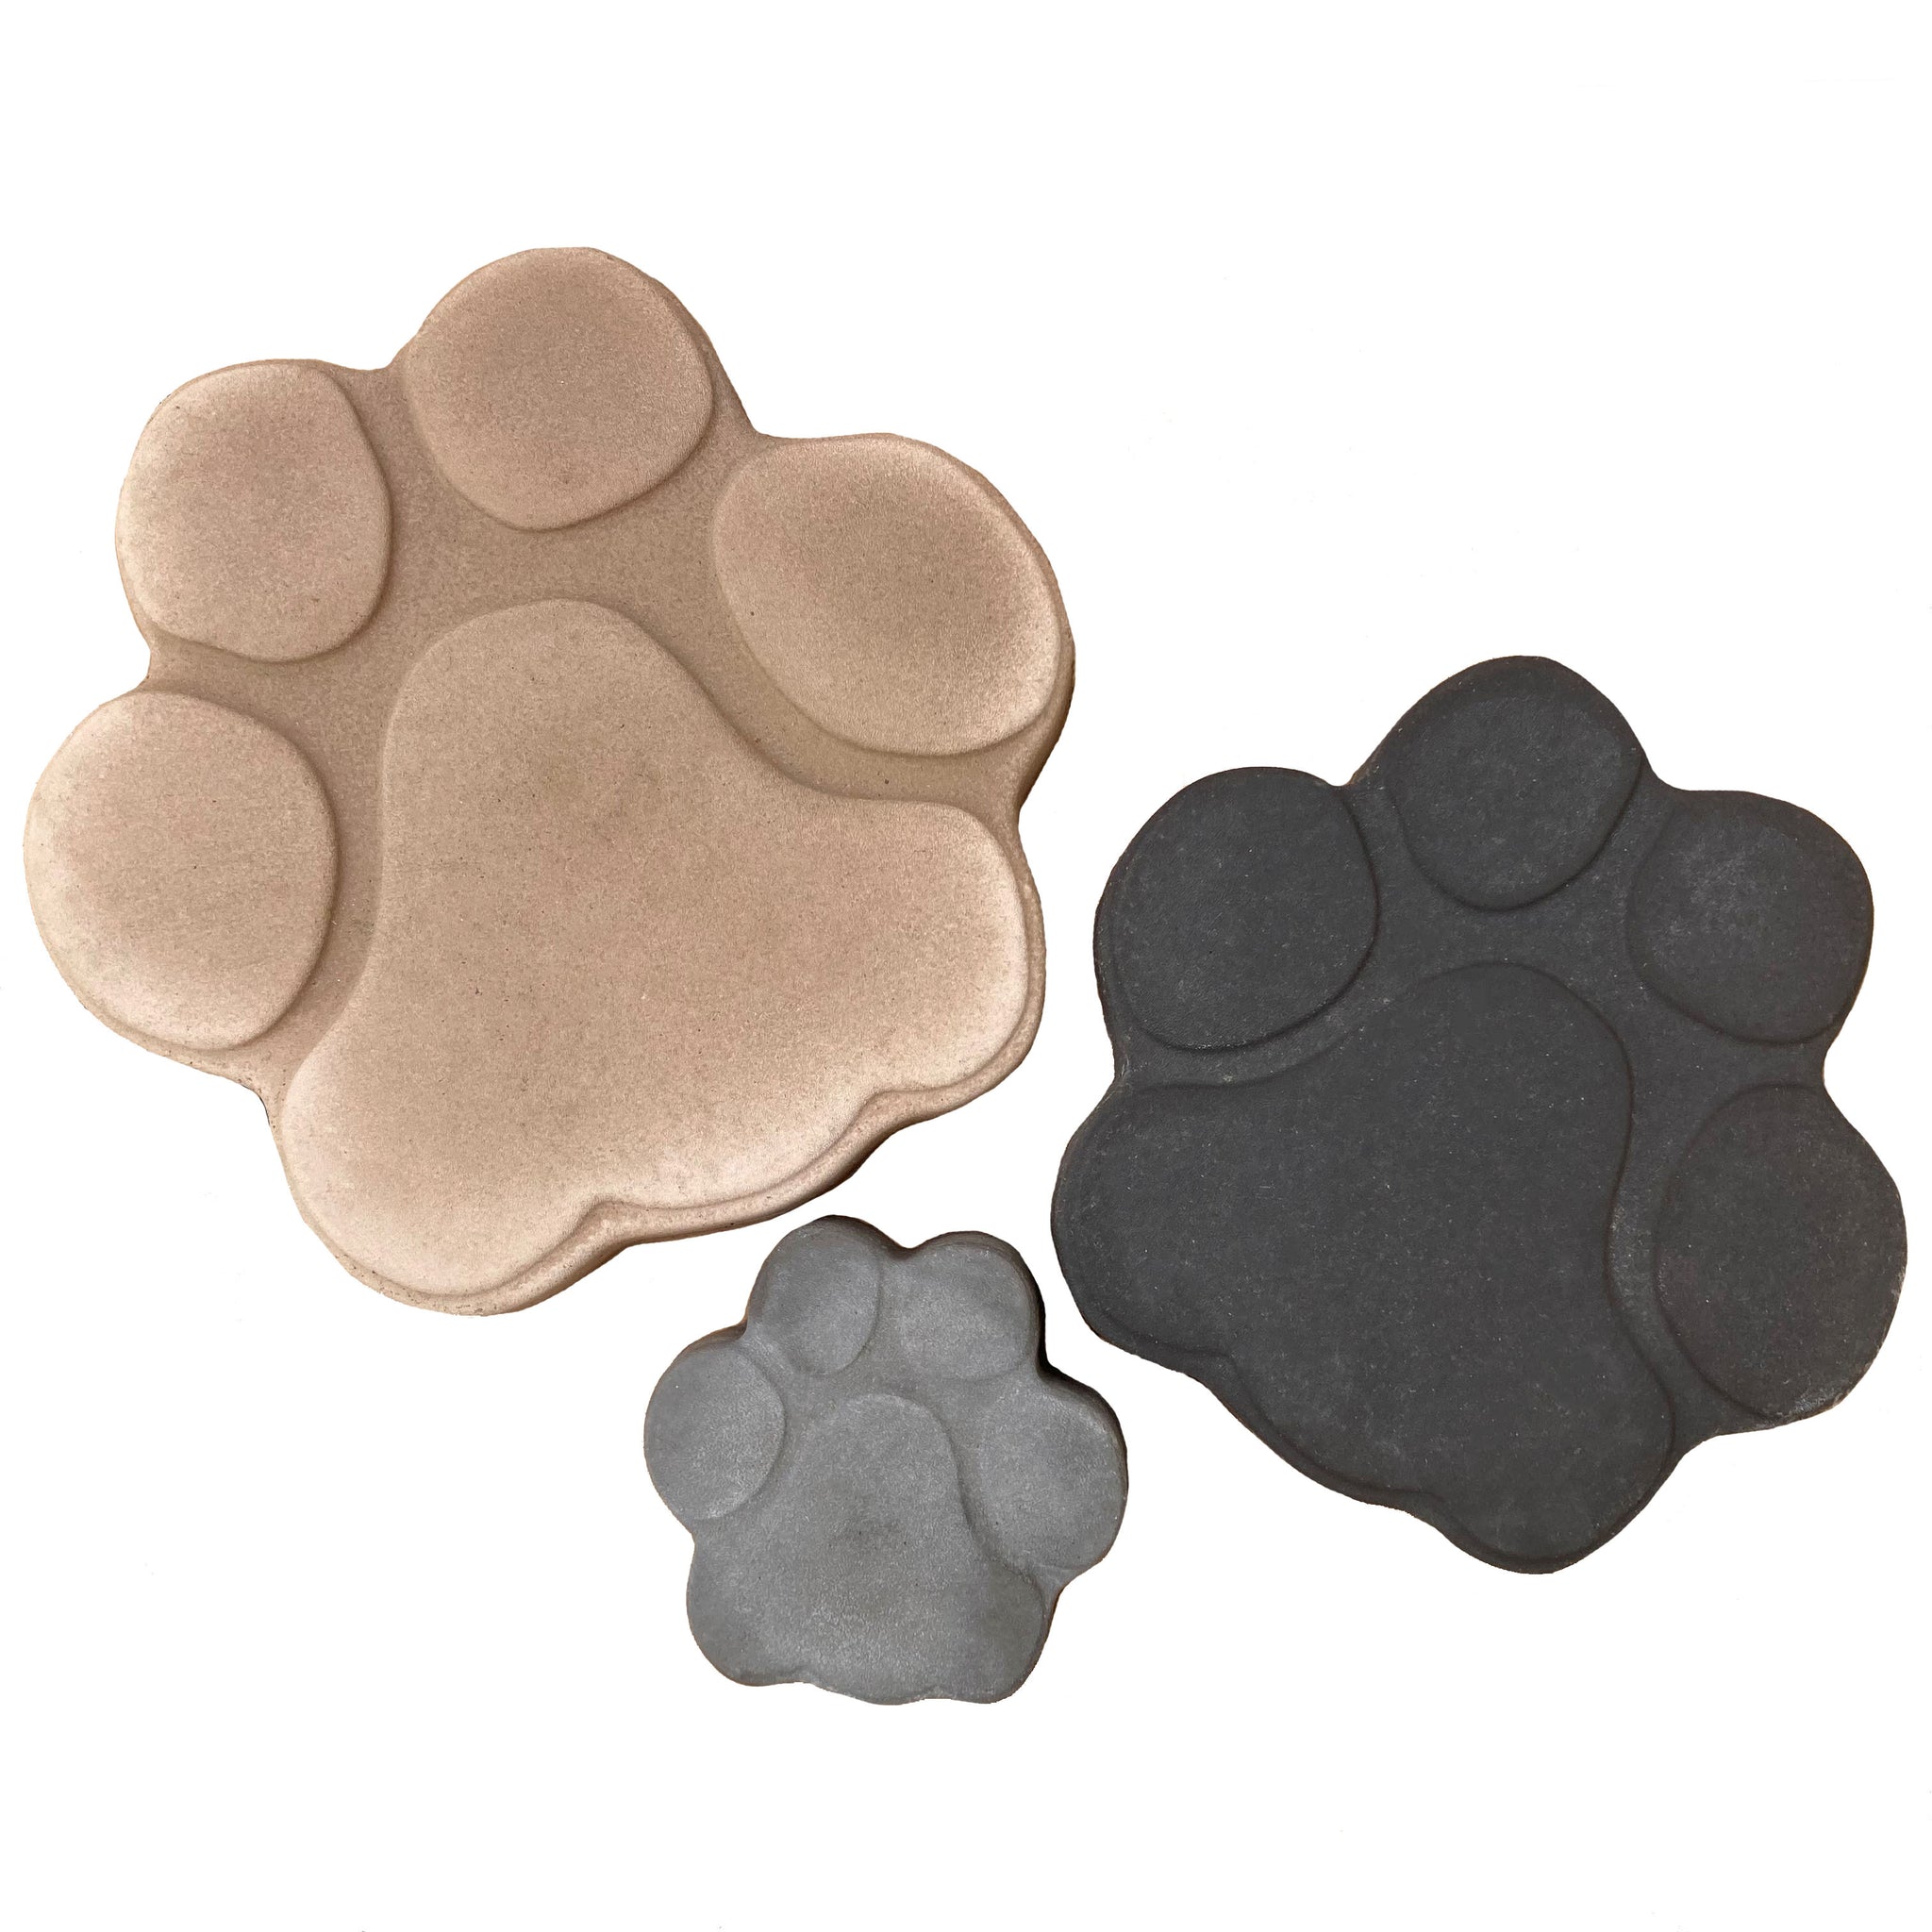 Paw Print mold Stepping Stone Mold